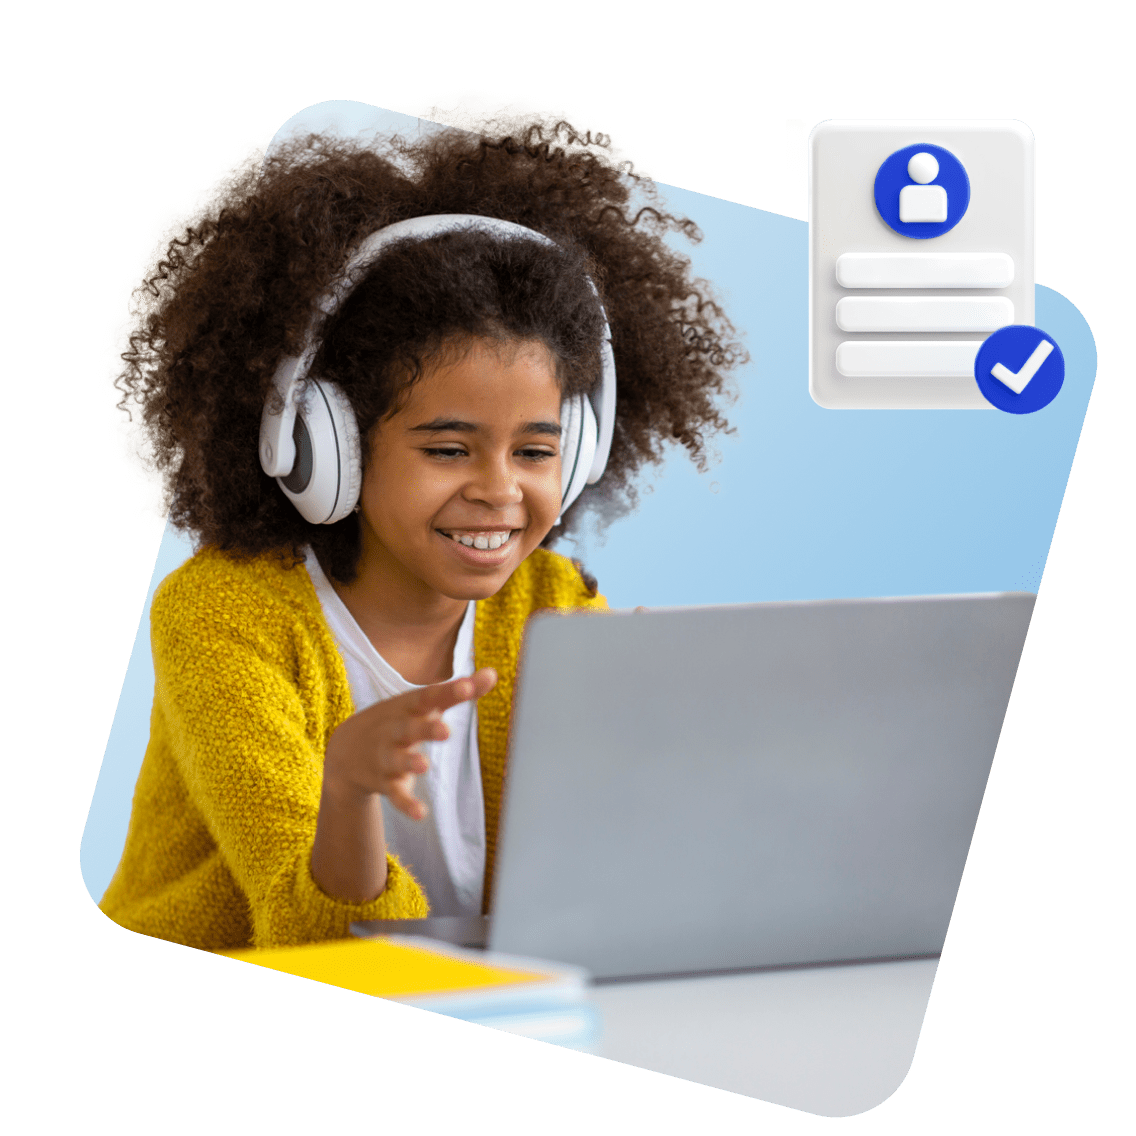 Types of Home-schoolers and Online Learners image 11 (name 3 Young Girl Laptop Headphones Certificate)